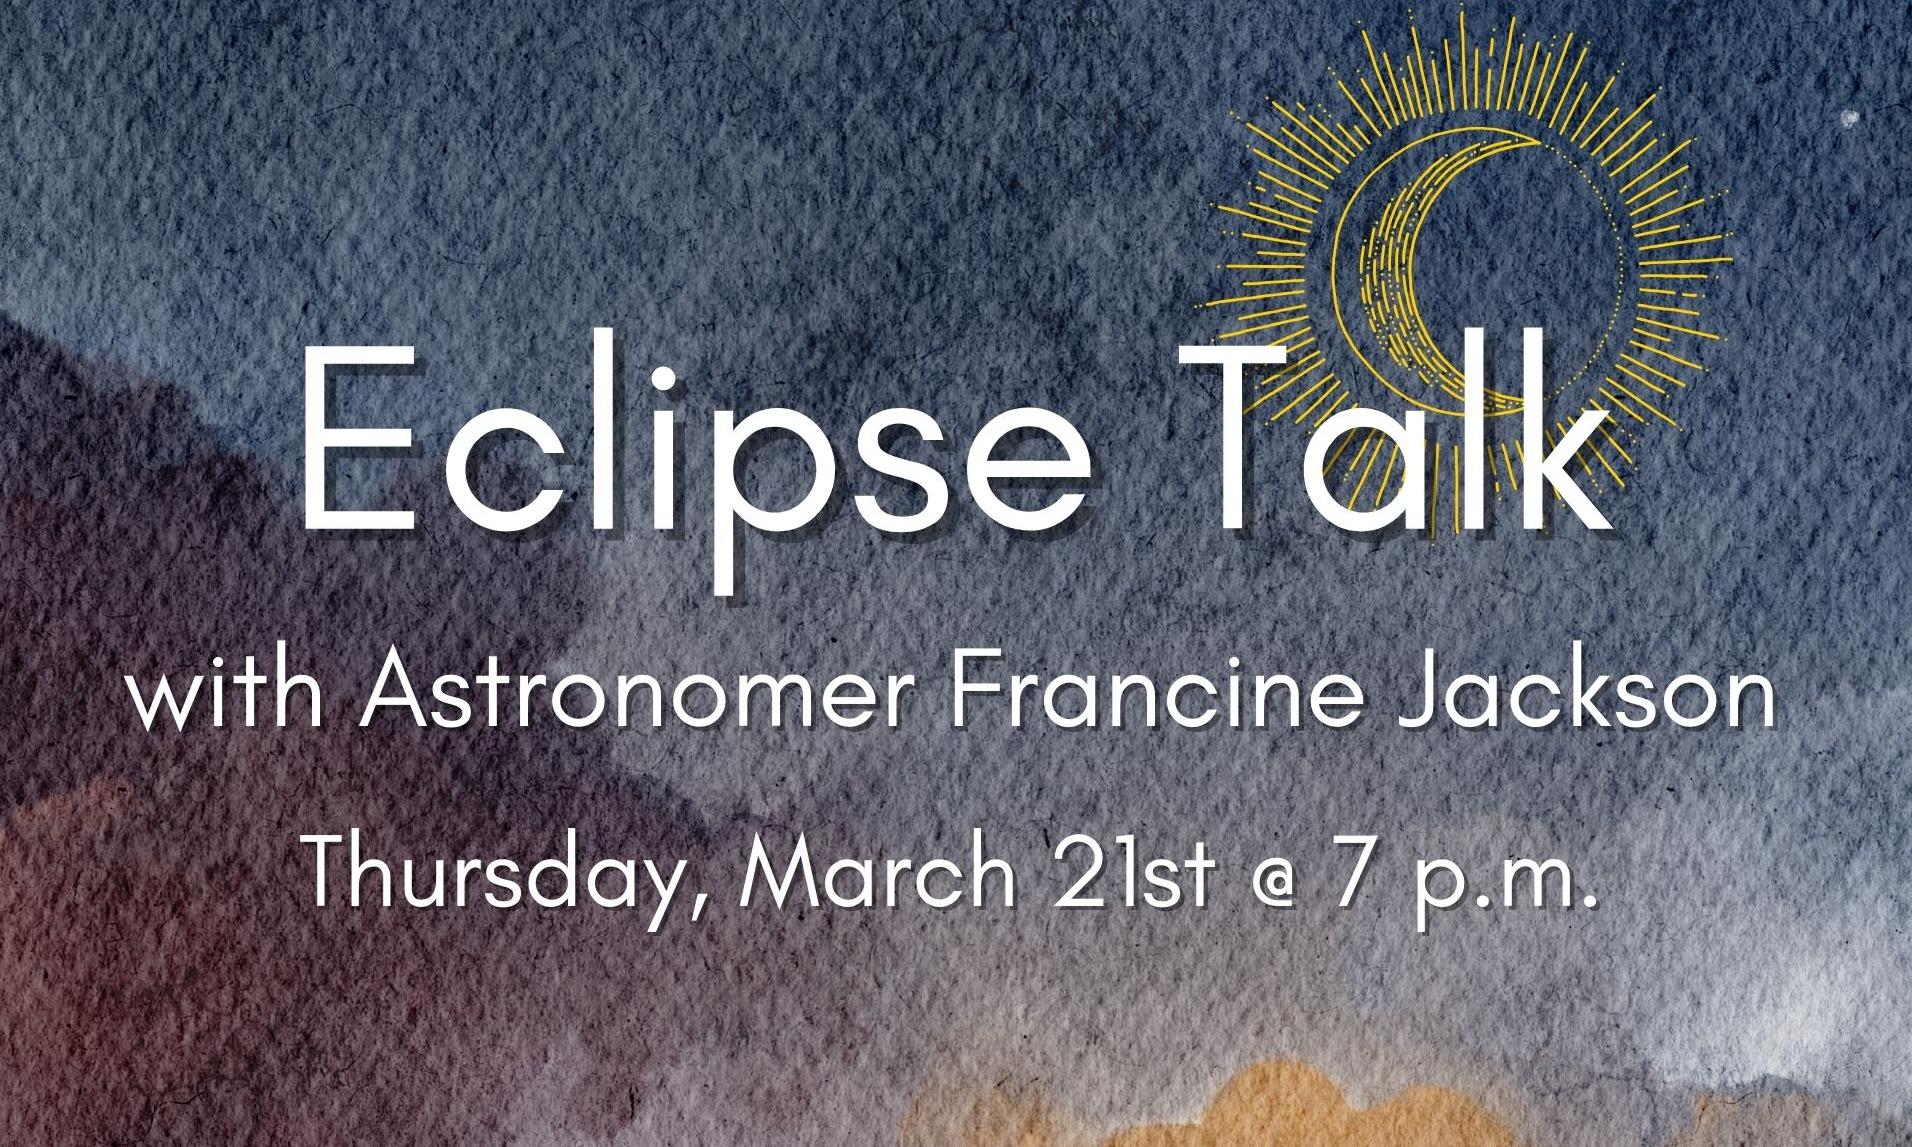 Dark sky background with text: Eclipse talk with Astronomer Francine Jackson Thursday, March 21st at 7 p.m.